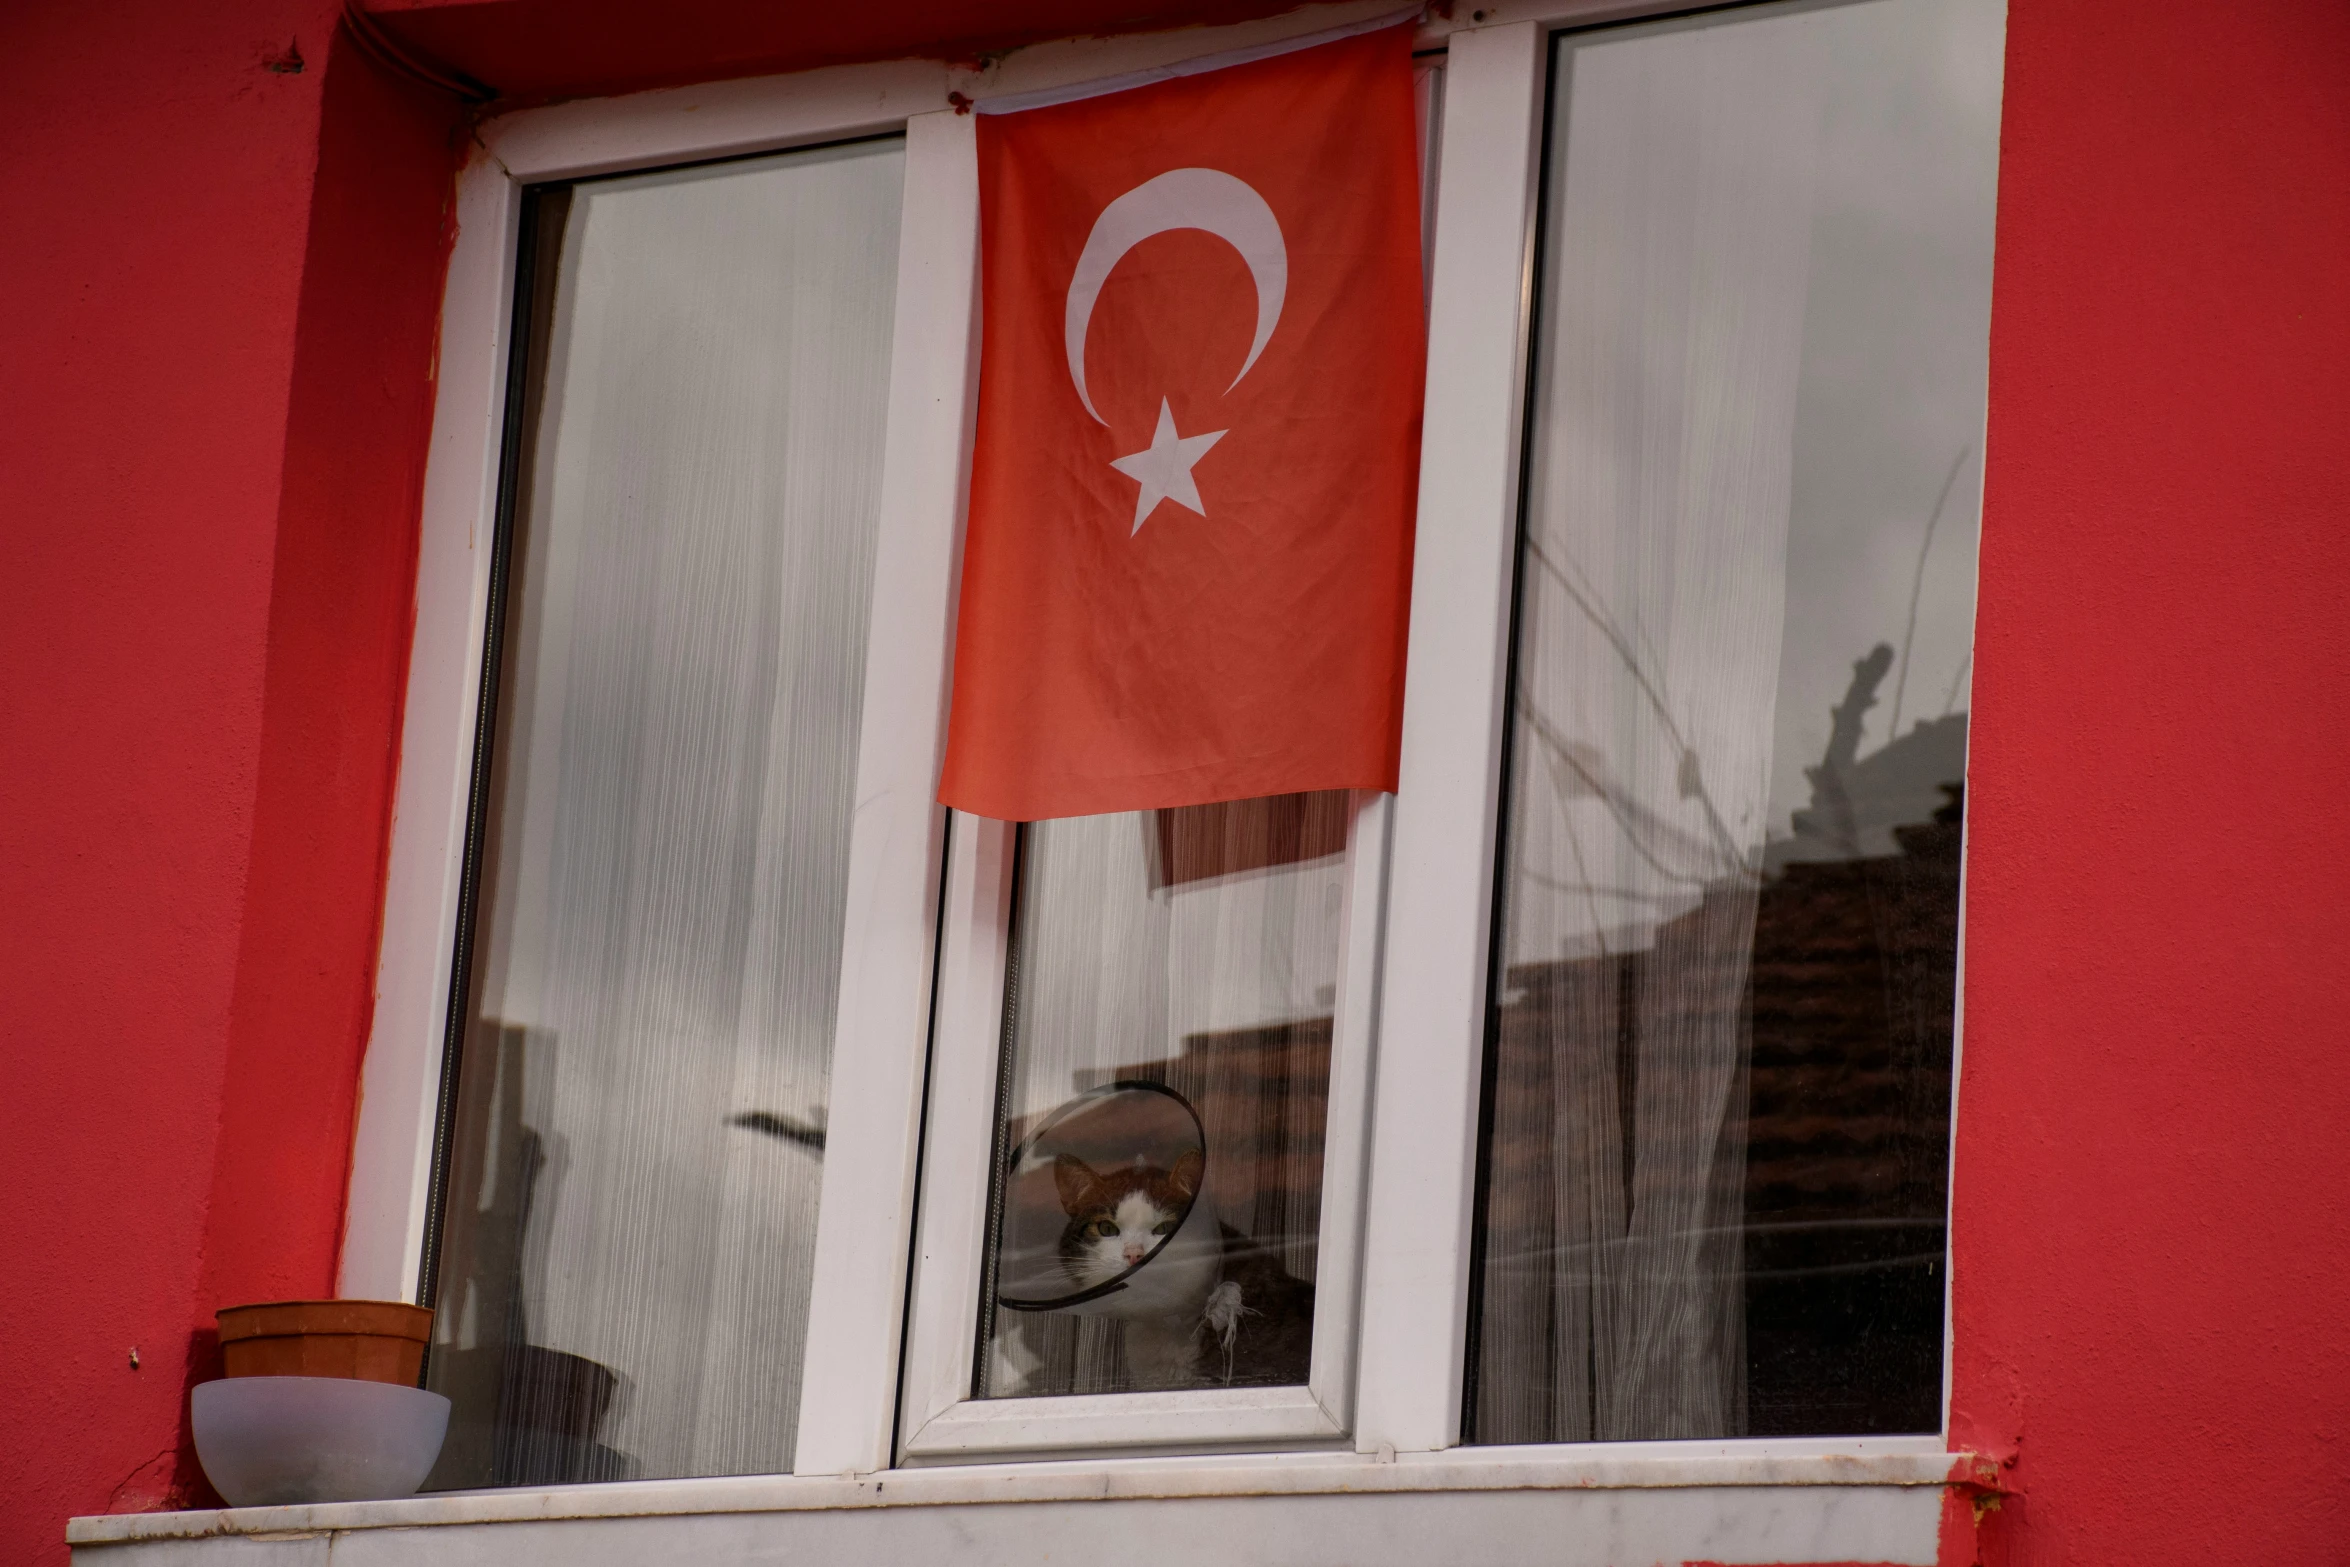 there is a flag in the window sill with red walls